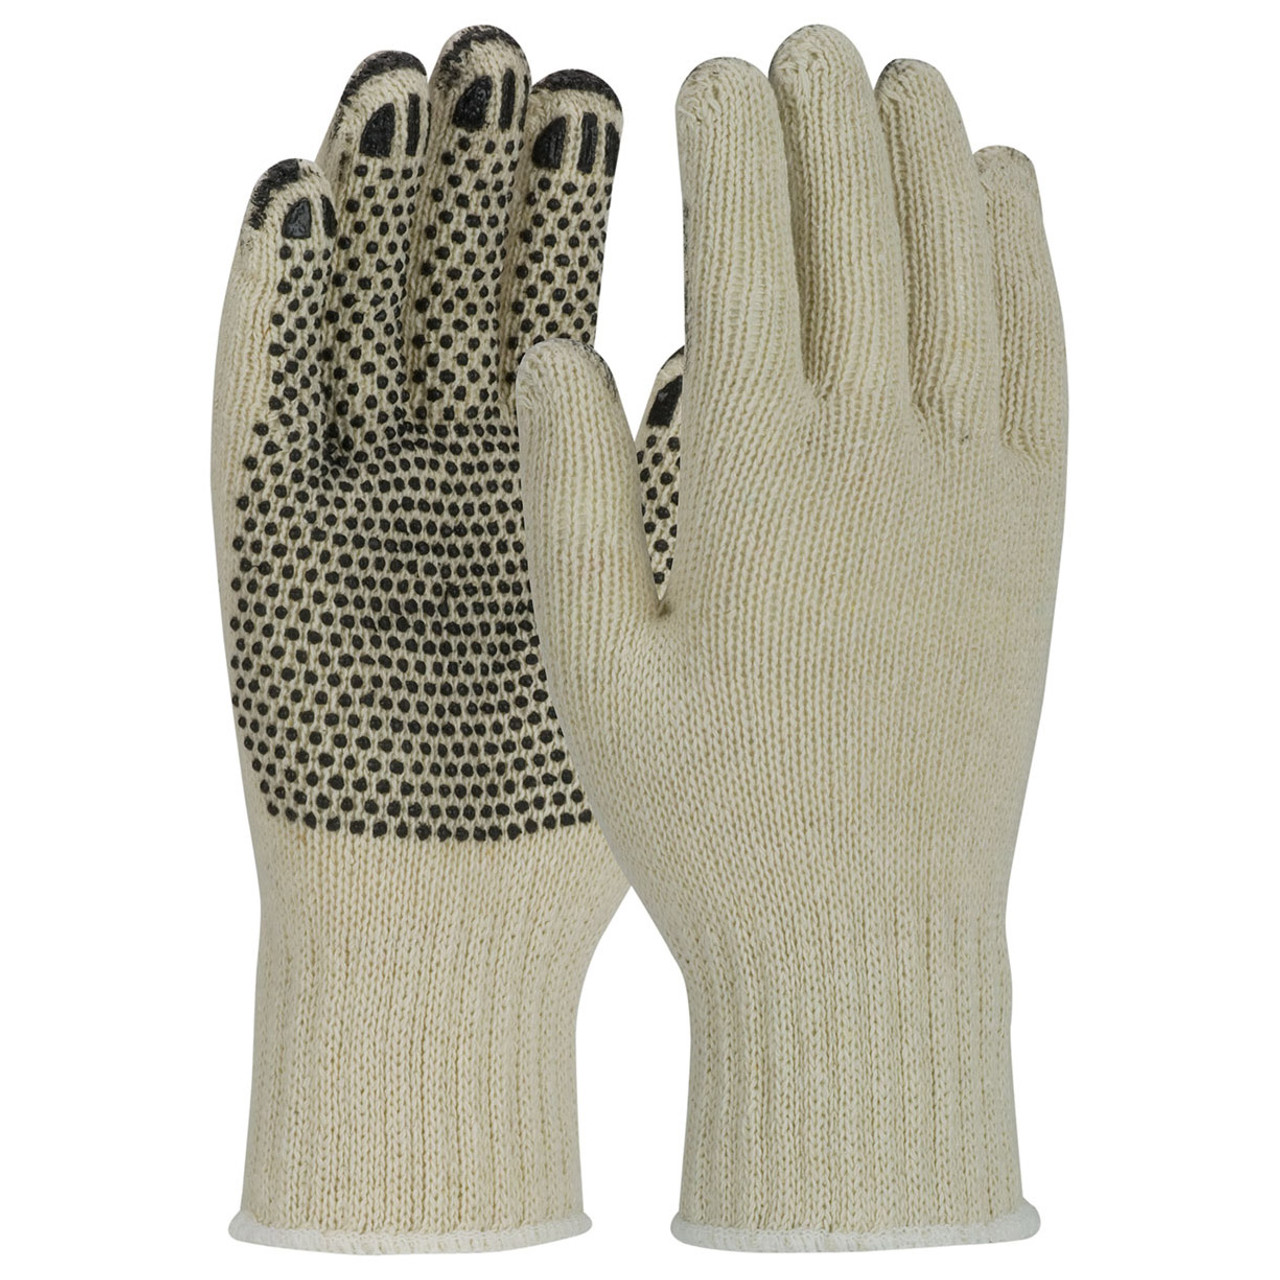 PIP 36-C330PD/L FingerNails Seamless Knit Cotton/Polyester Gloves with PVC Dot Grip - Heavy Weight - Dozen Pairs - Large